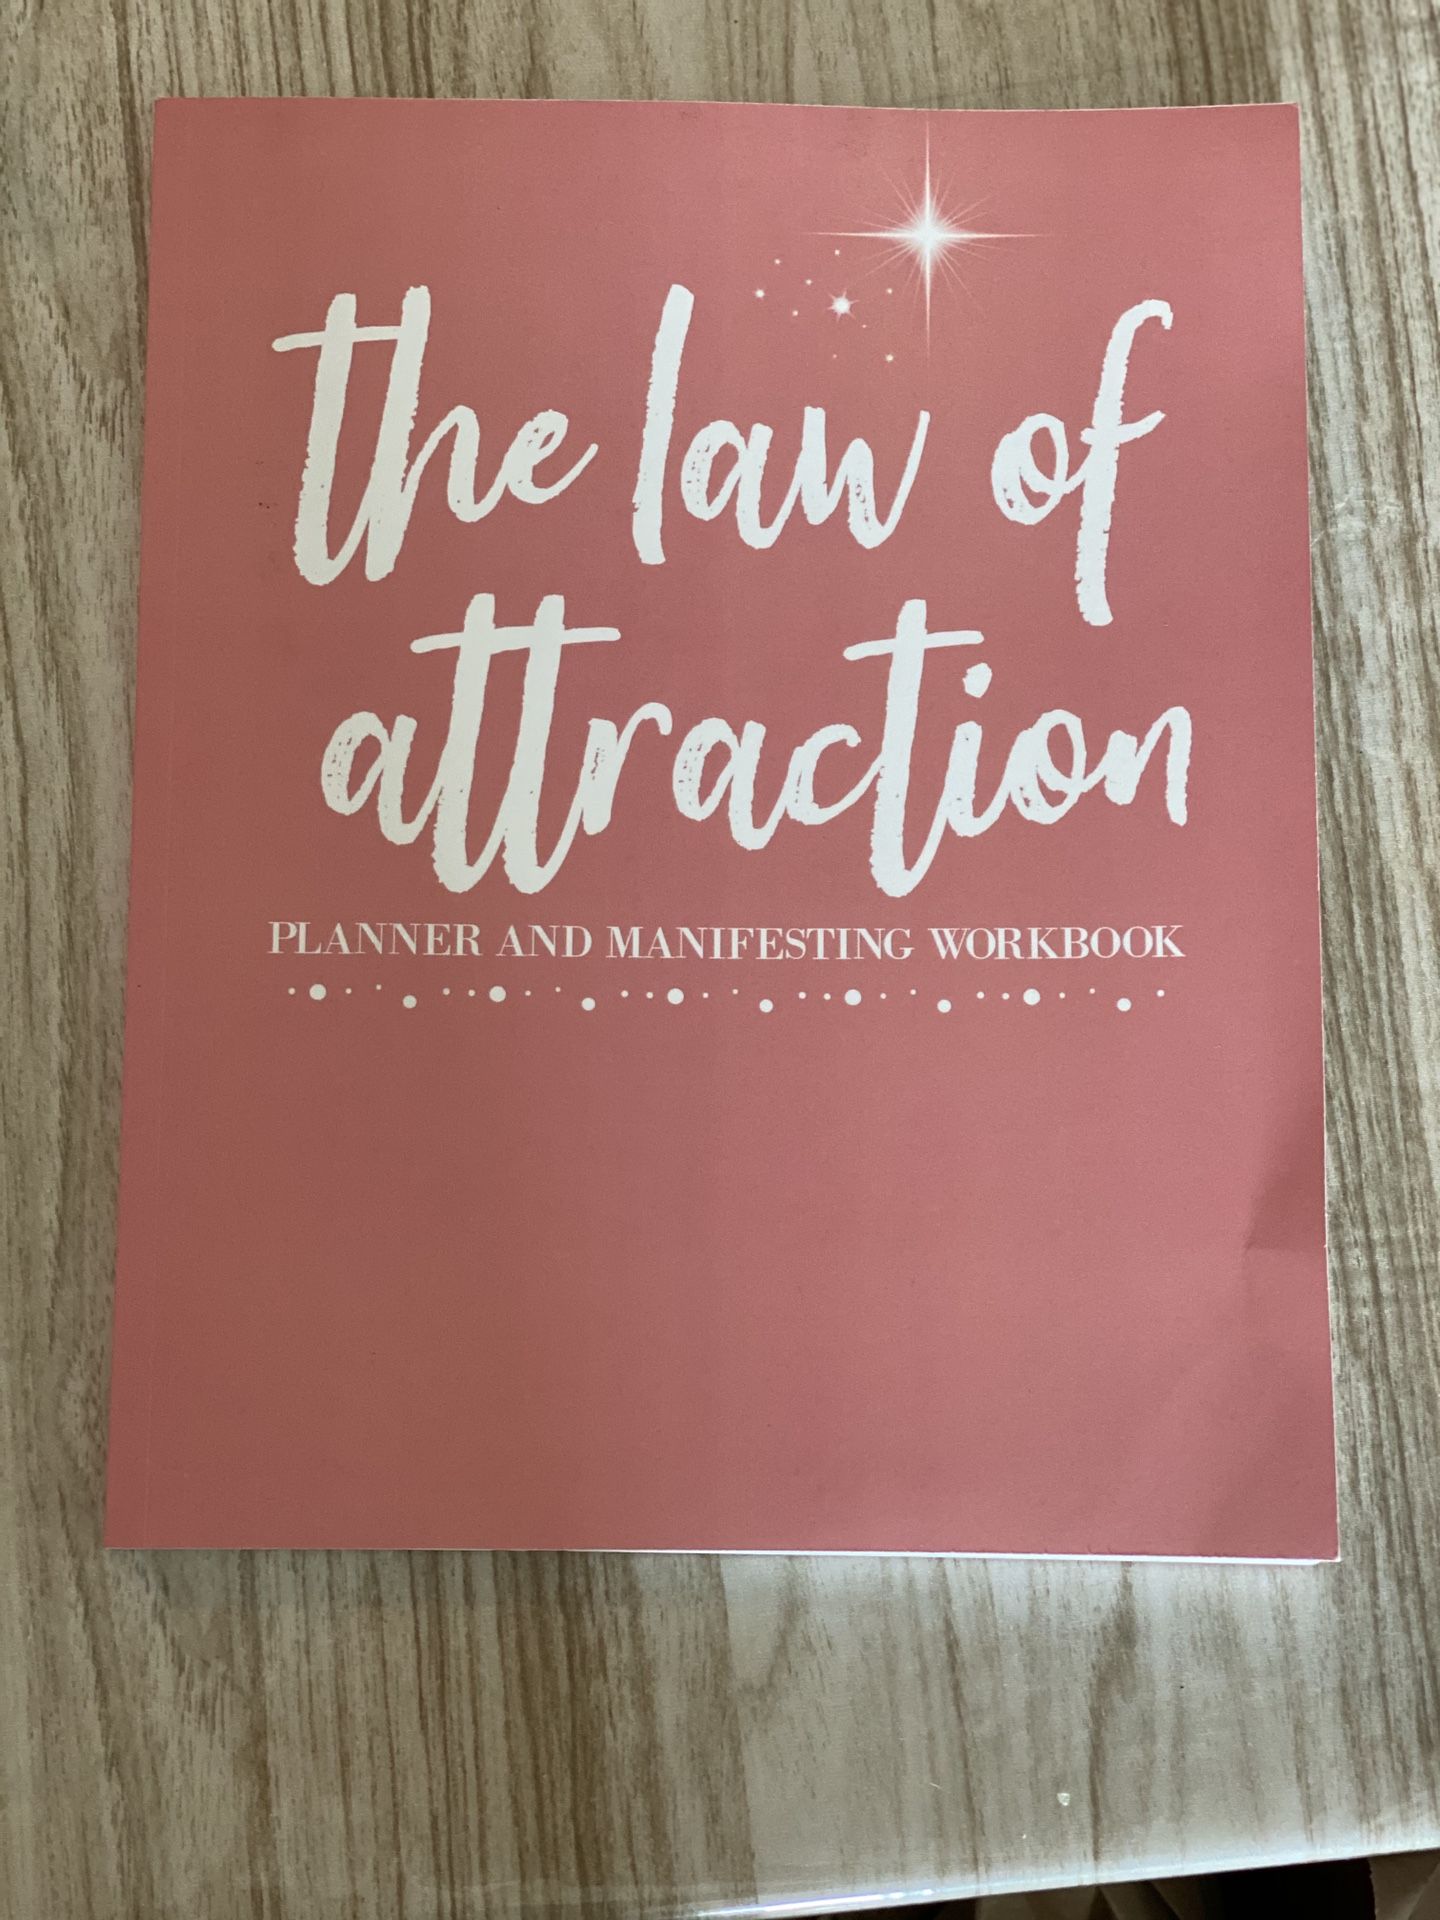 The law of attraction workbook